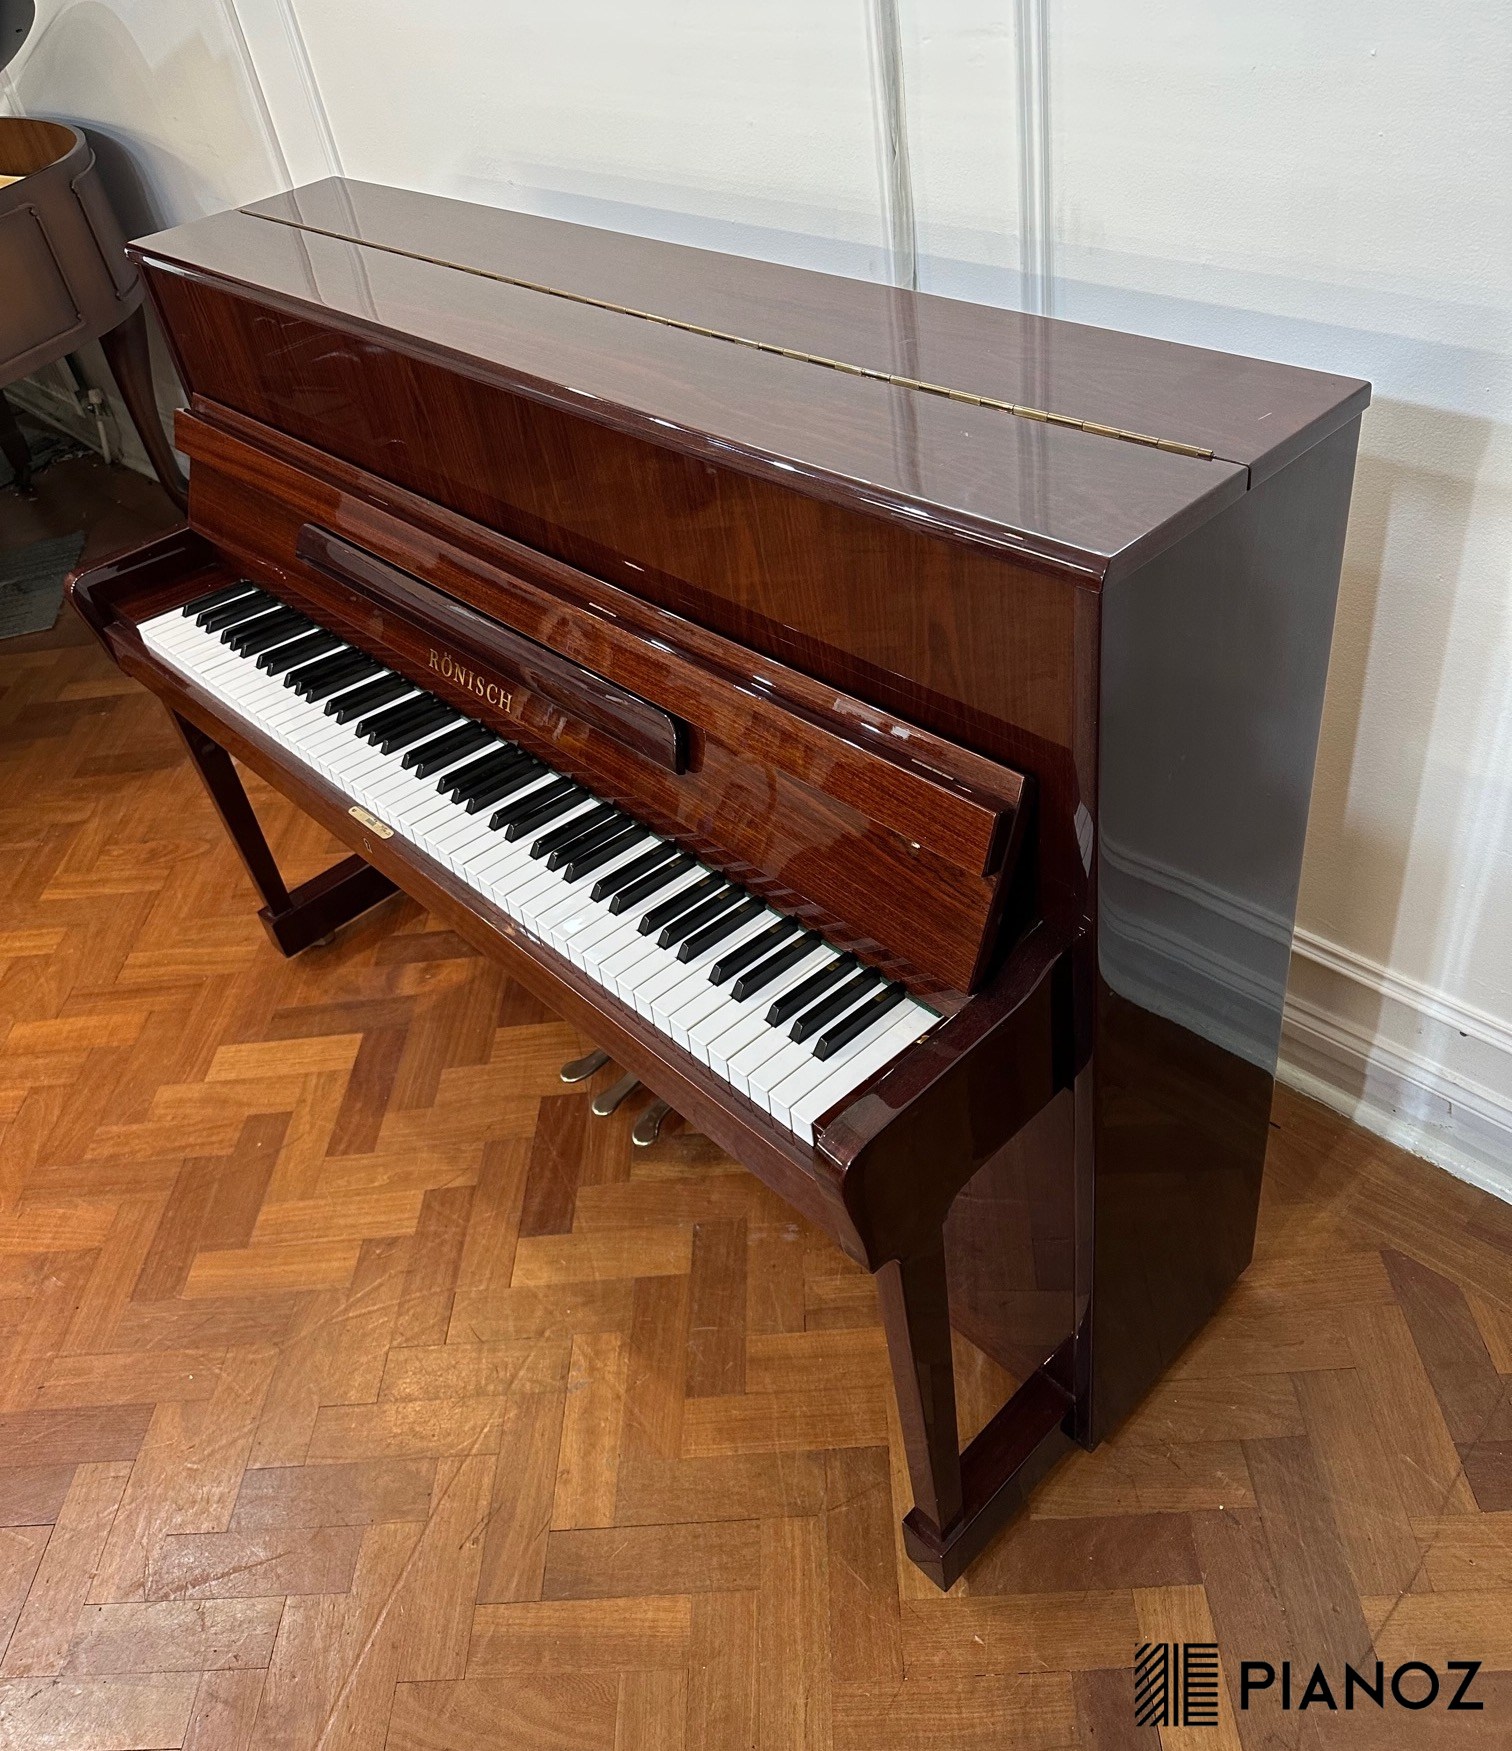 Ronisch 109 Upright Piano piano for sale in UK